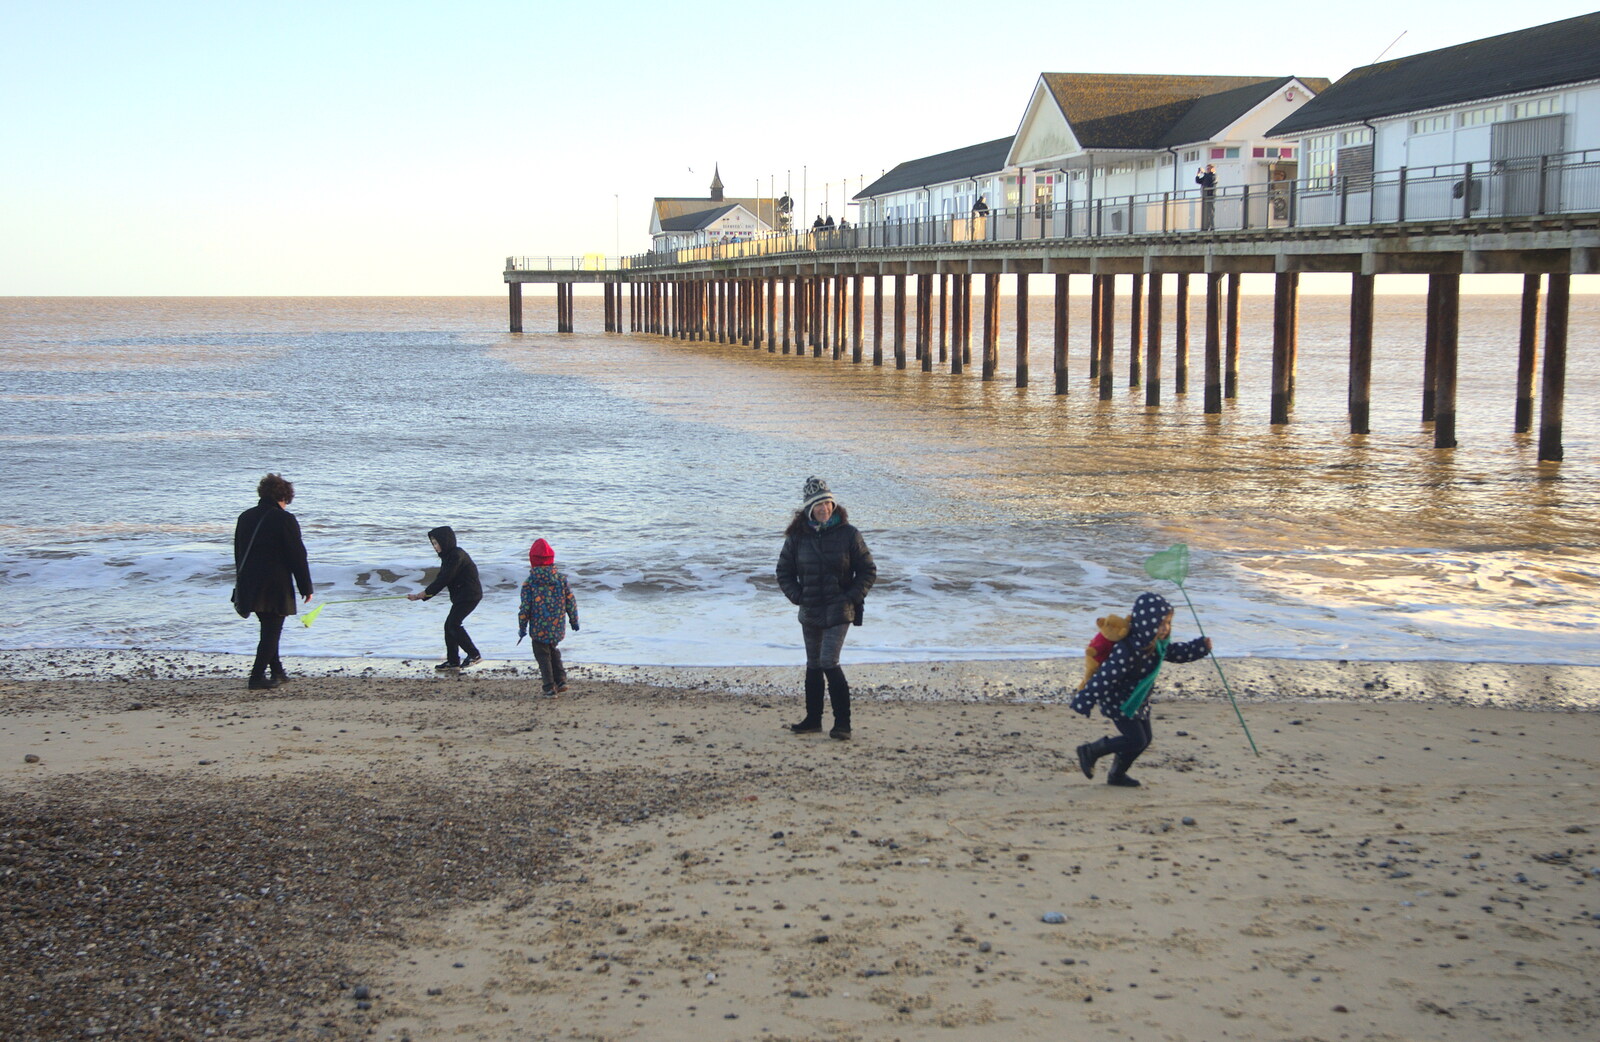 More messing around on the beach from Boxing Day in Southwold, Suffolk - 26th December 2016